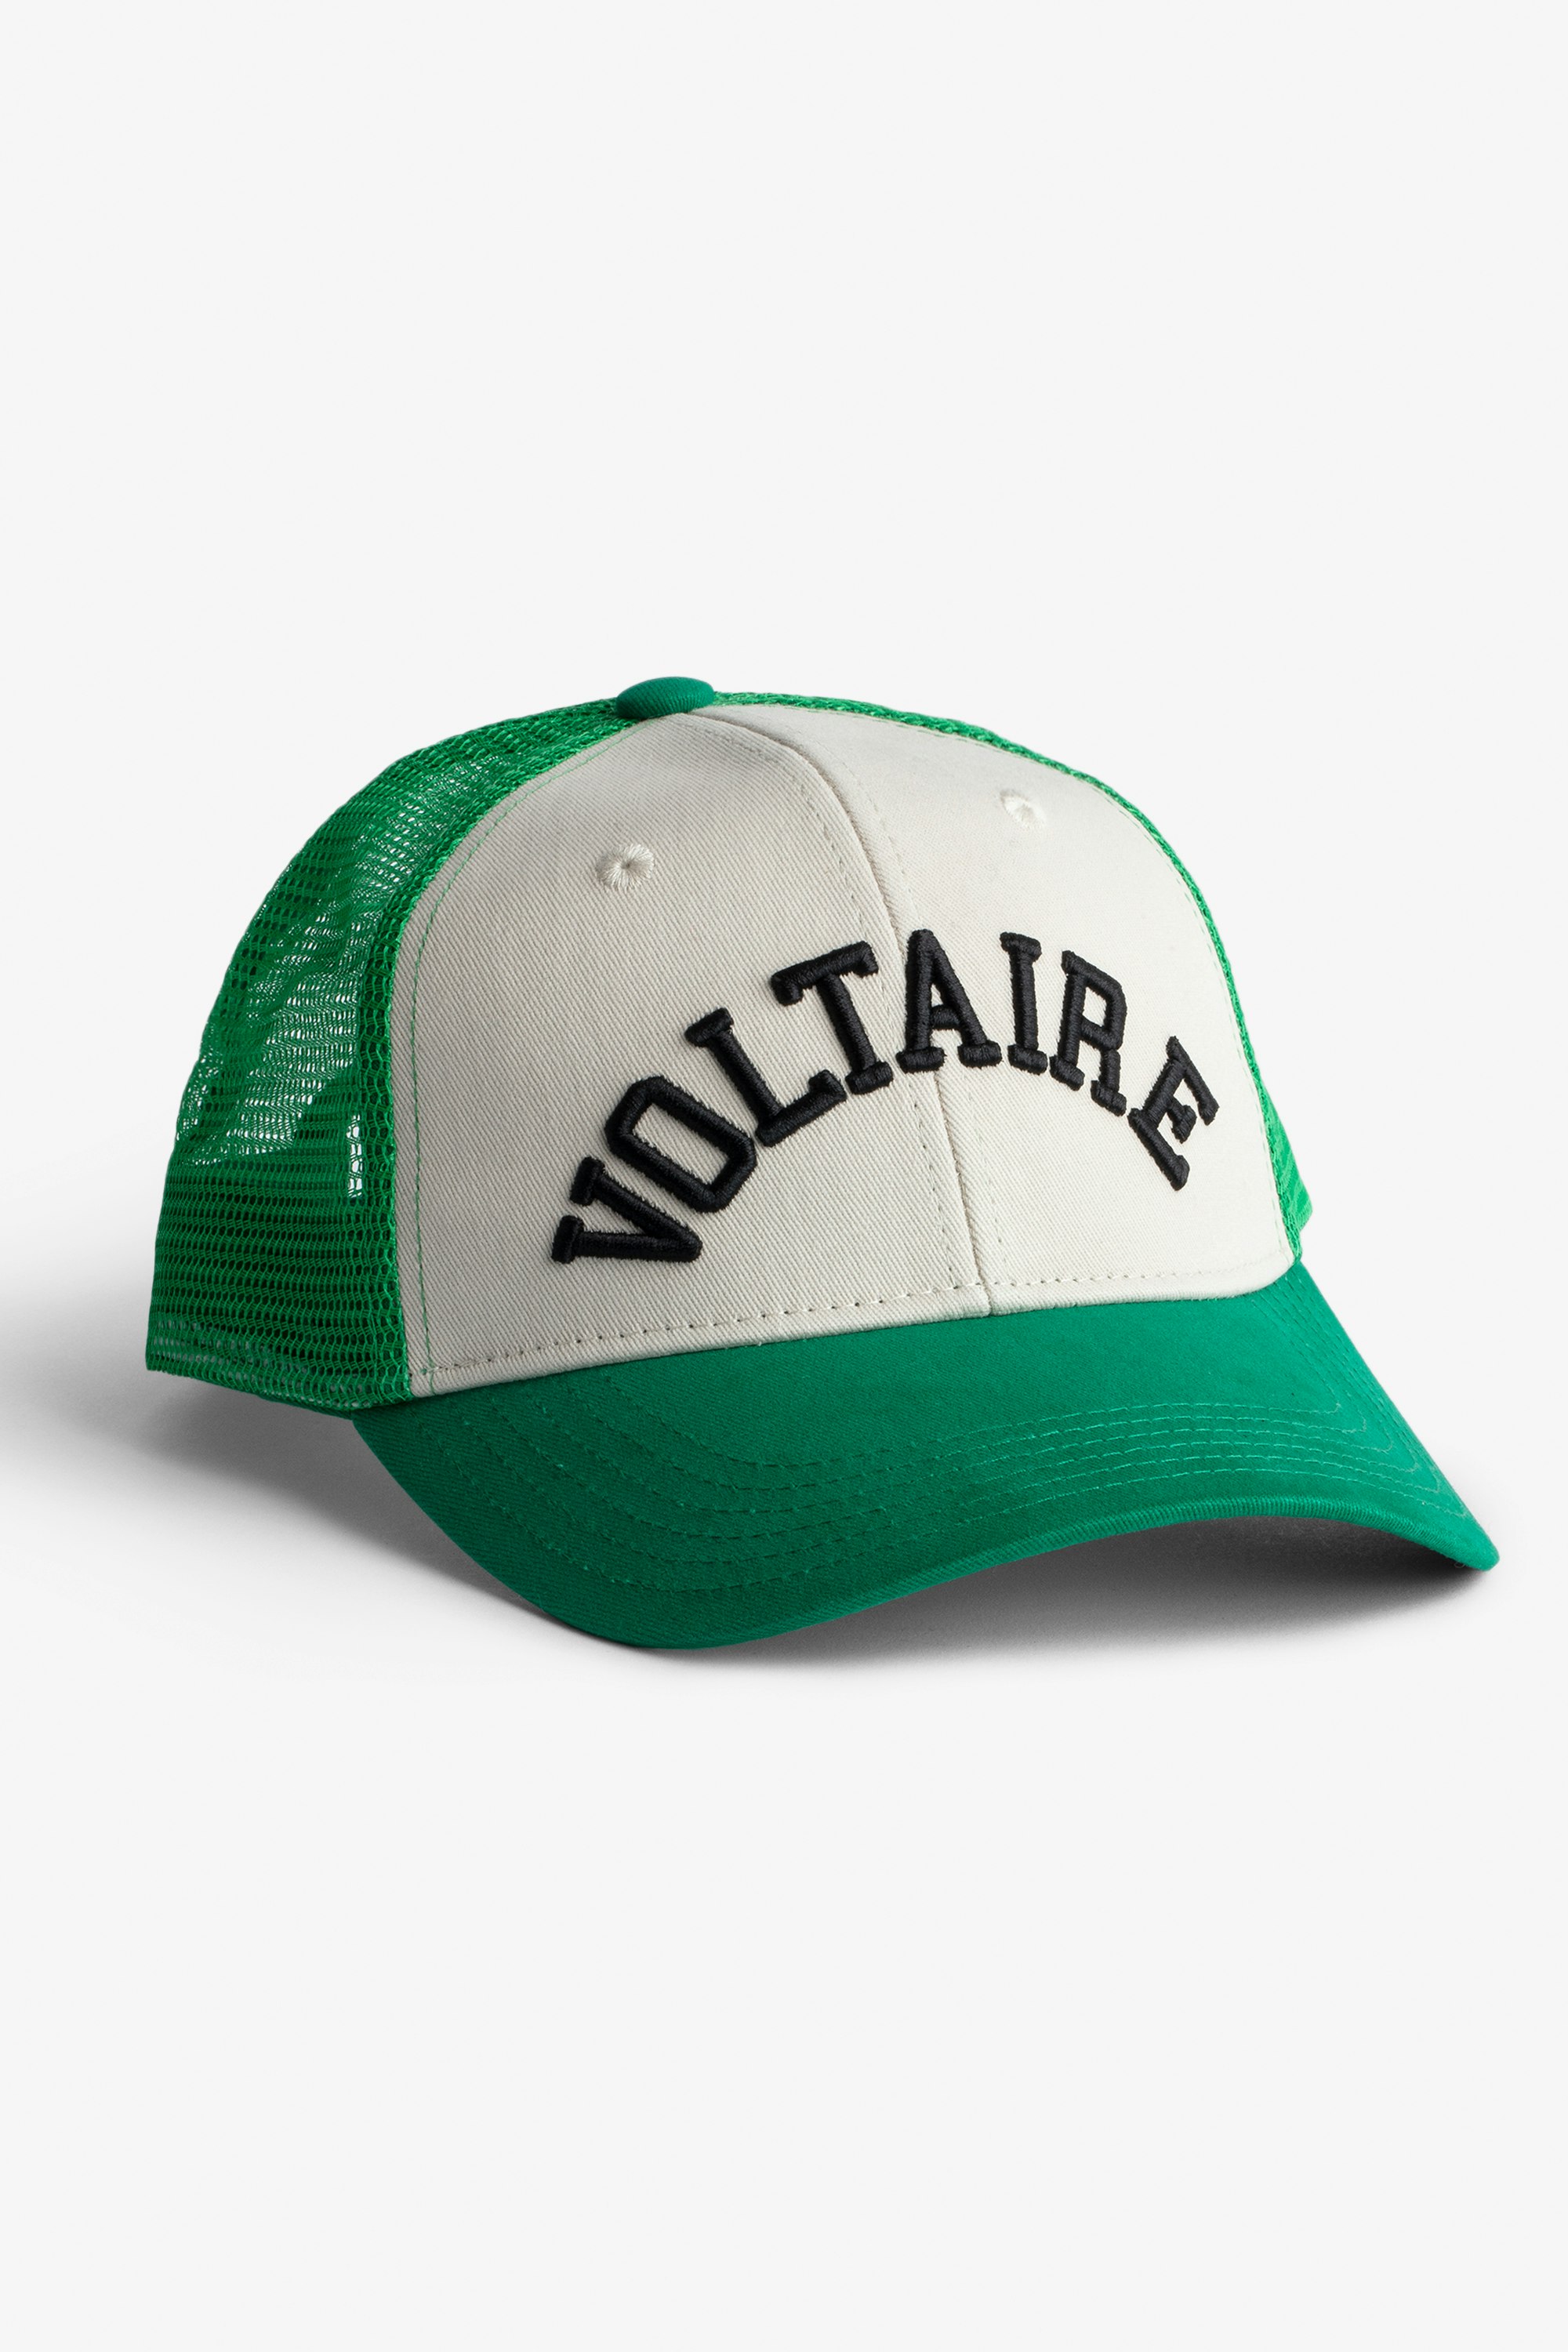 Klelia Voltaire Cap Women’s Voltaire embroidered cap in green cotton and mesh